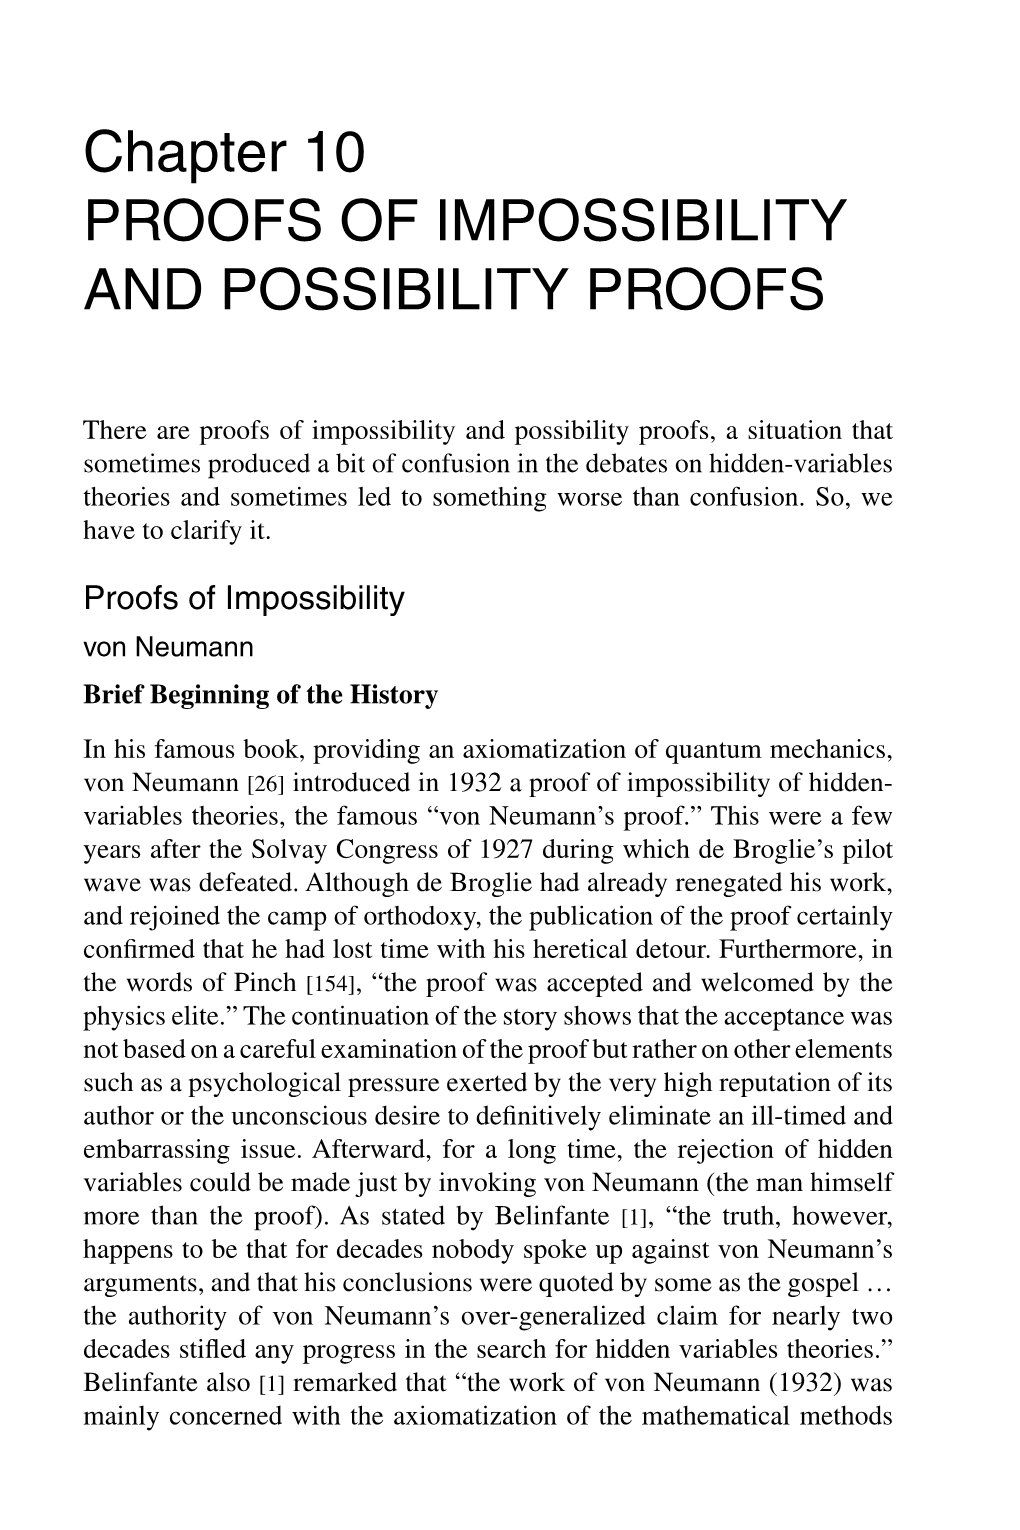 Chapter 10 PROOFS of IMPOSSIBILITY and POSSIBILITY PROOFS